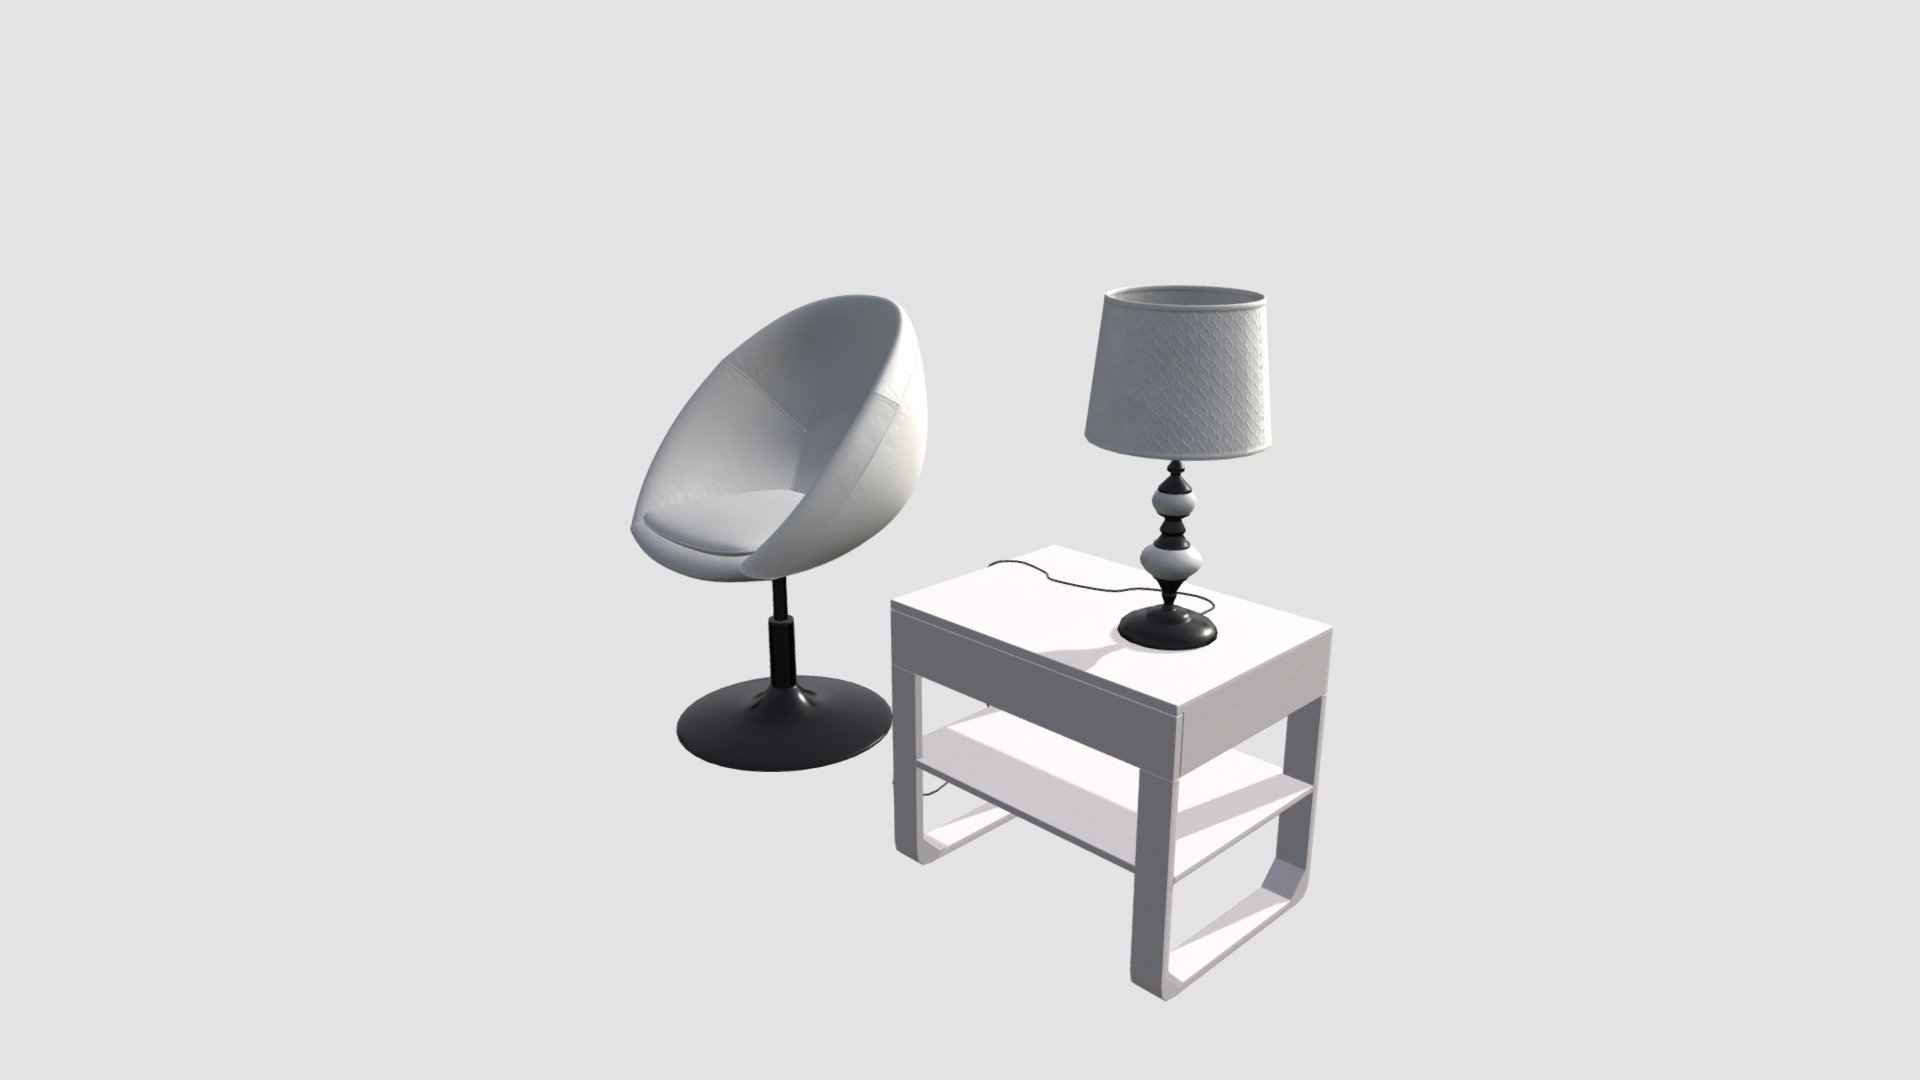 Professional, highly detailed model set of furniture for home and office. Textures and materials included. All objects are ready to use in your visualizations 3d model